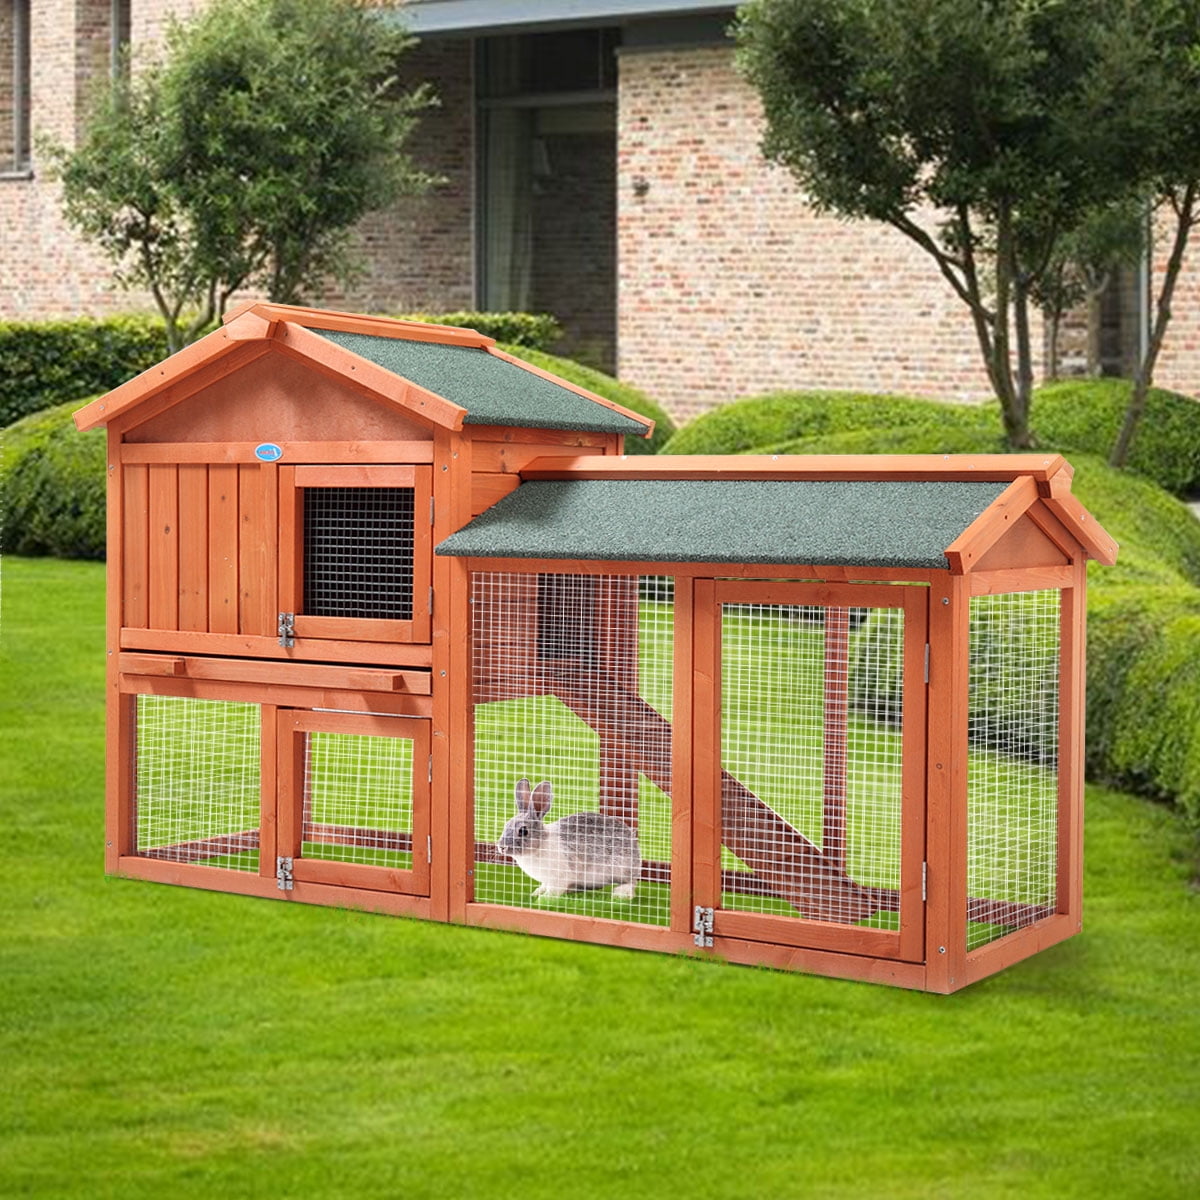 Wooden Chicken Coop Rabbit Hutch Pet Cage Wood Small Animal Poultry Cage Run 